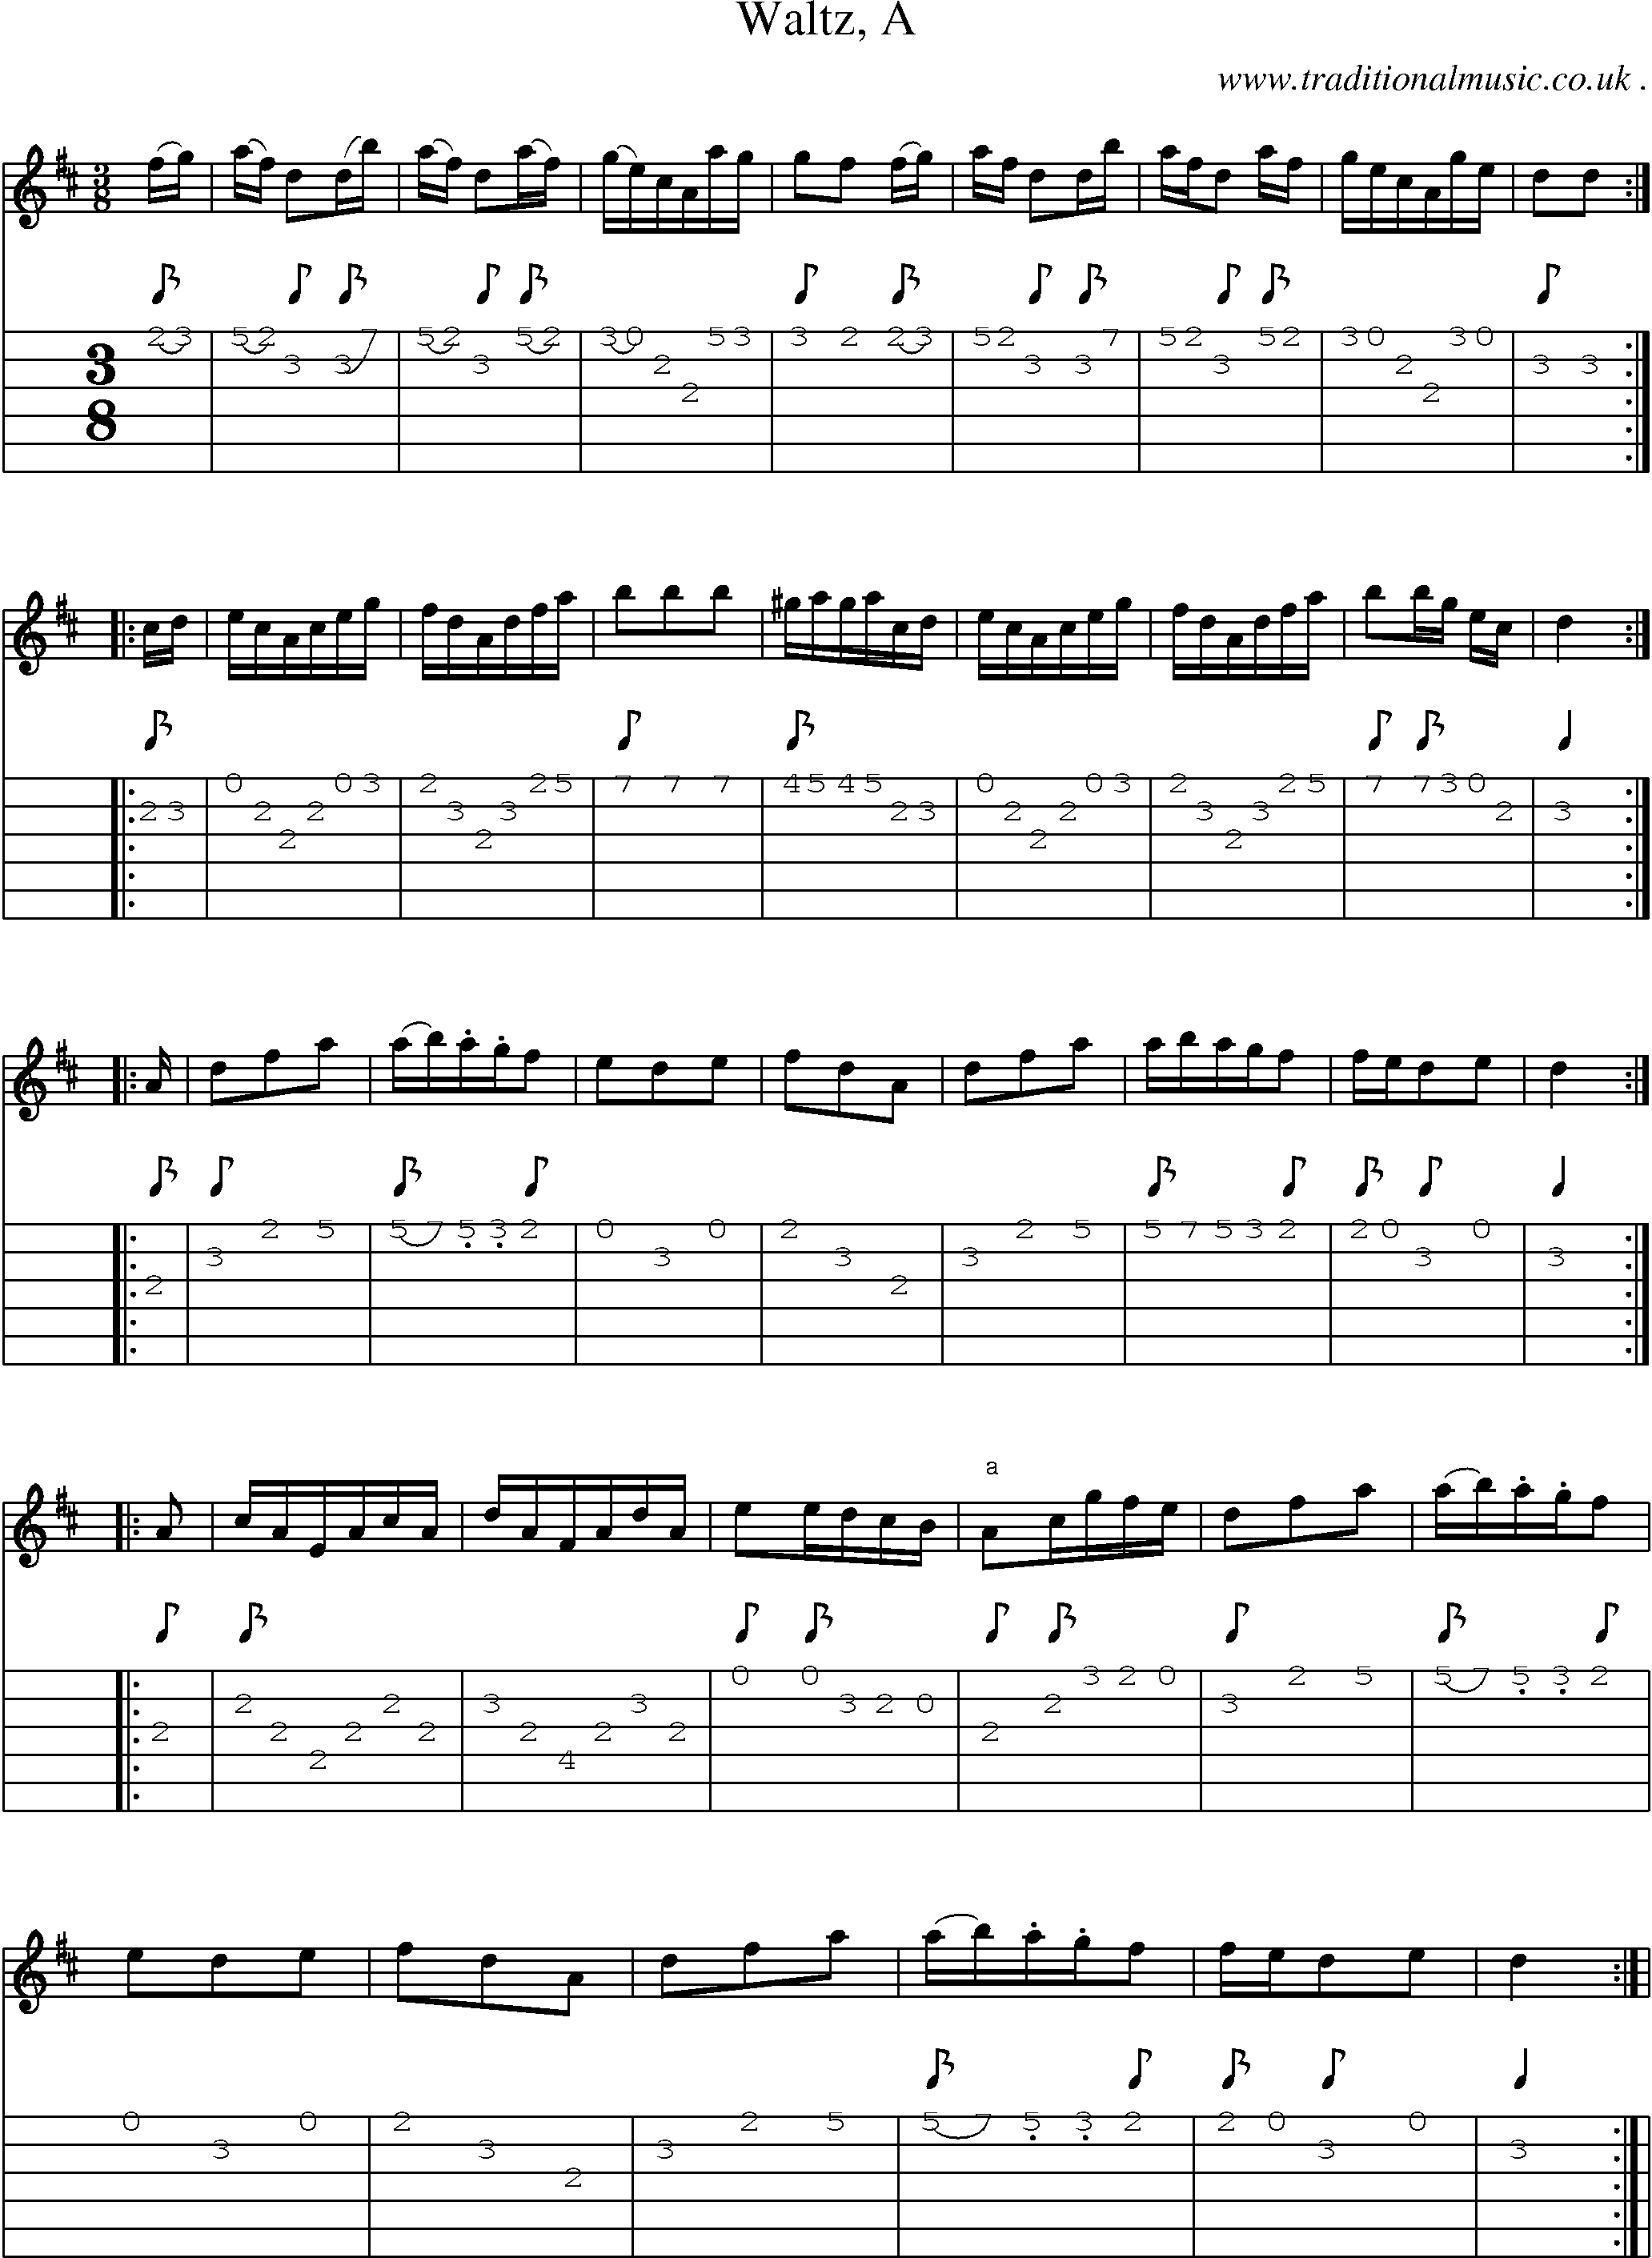 Sheet-Music and Guitar Tabs for Waltz A